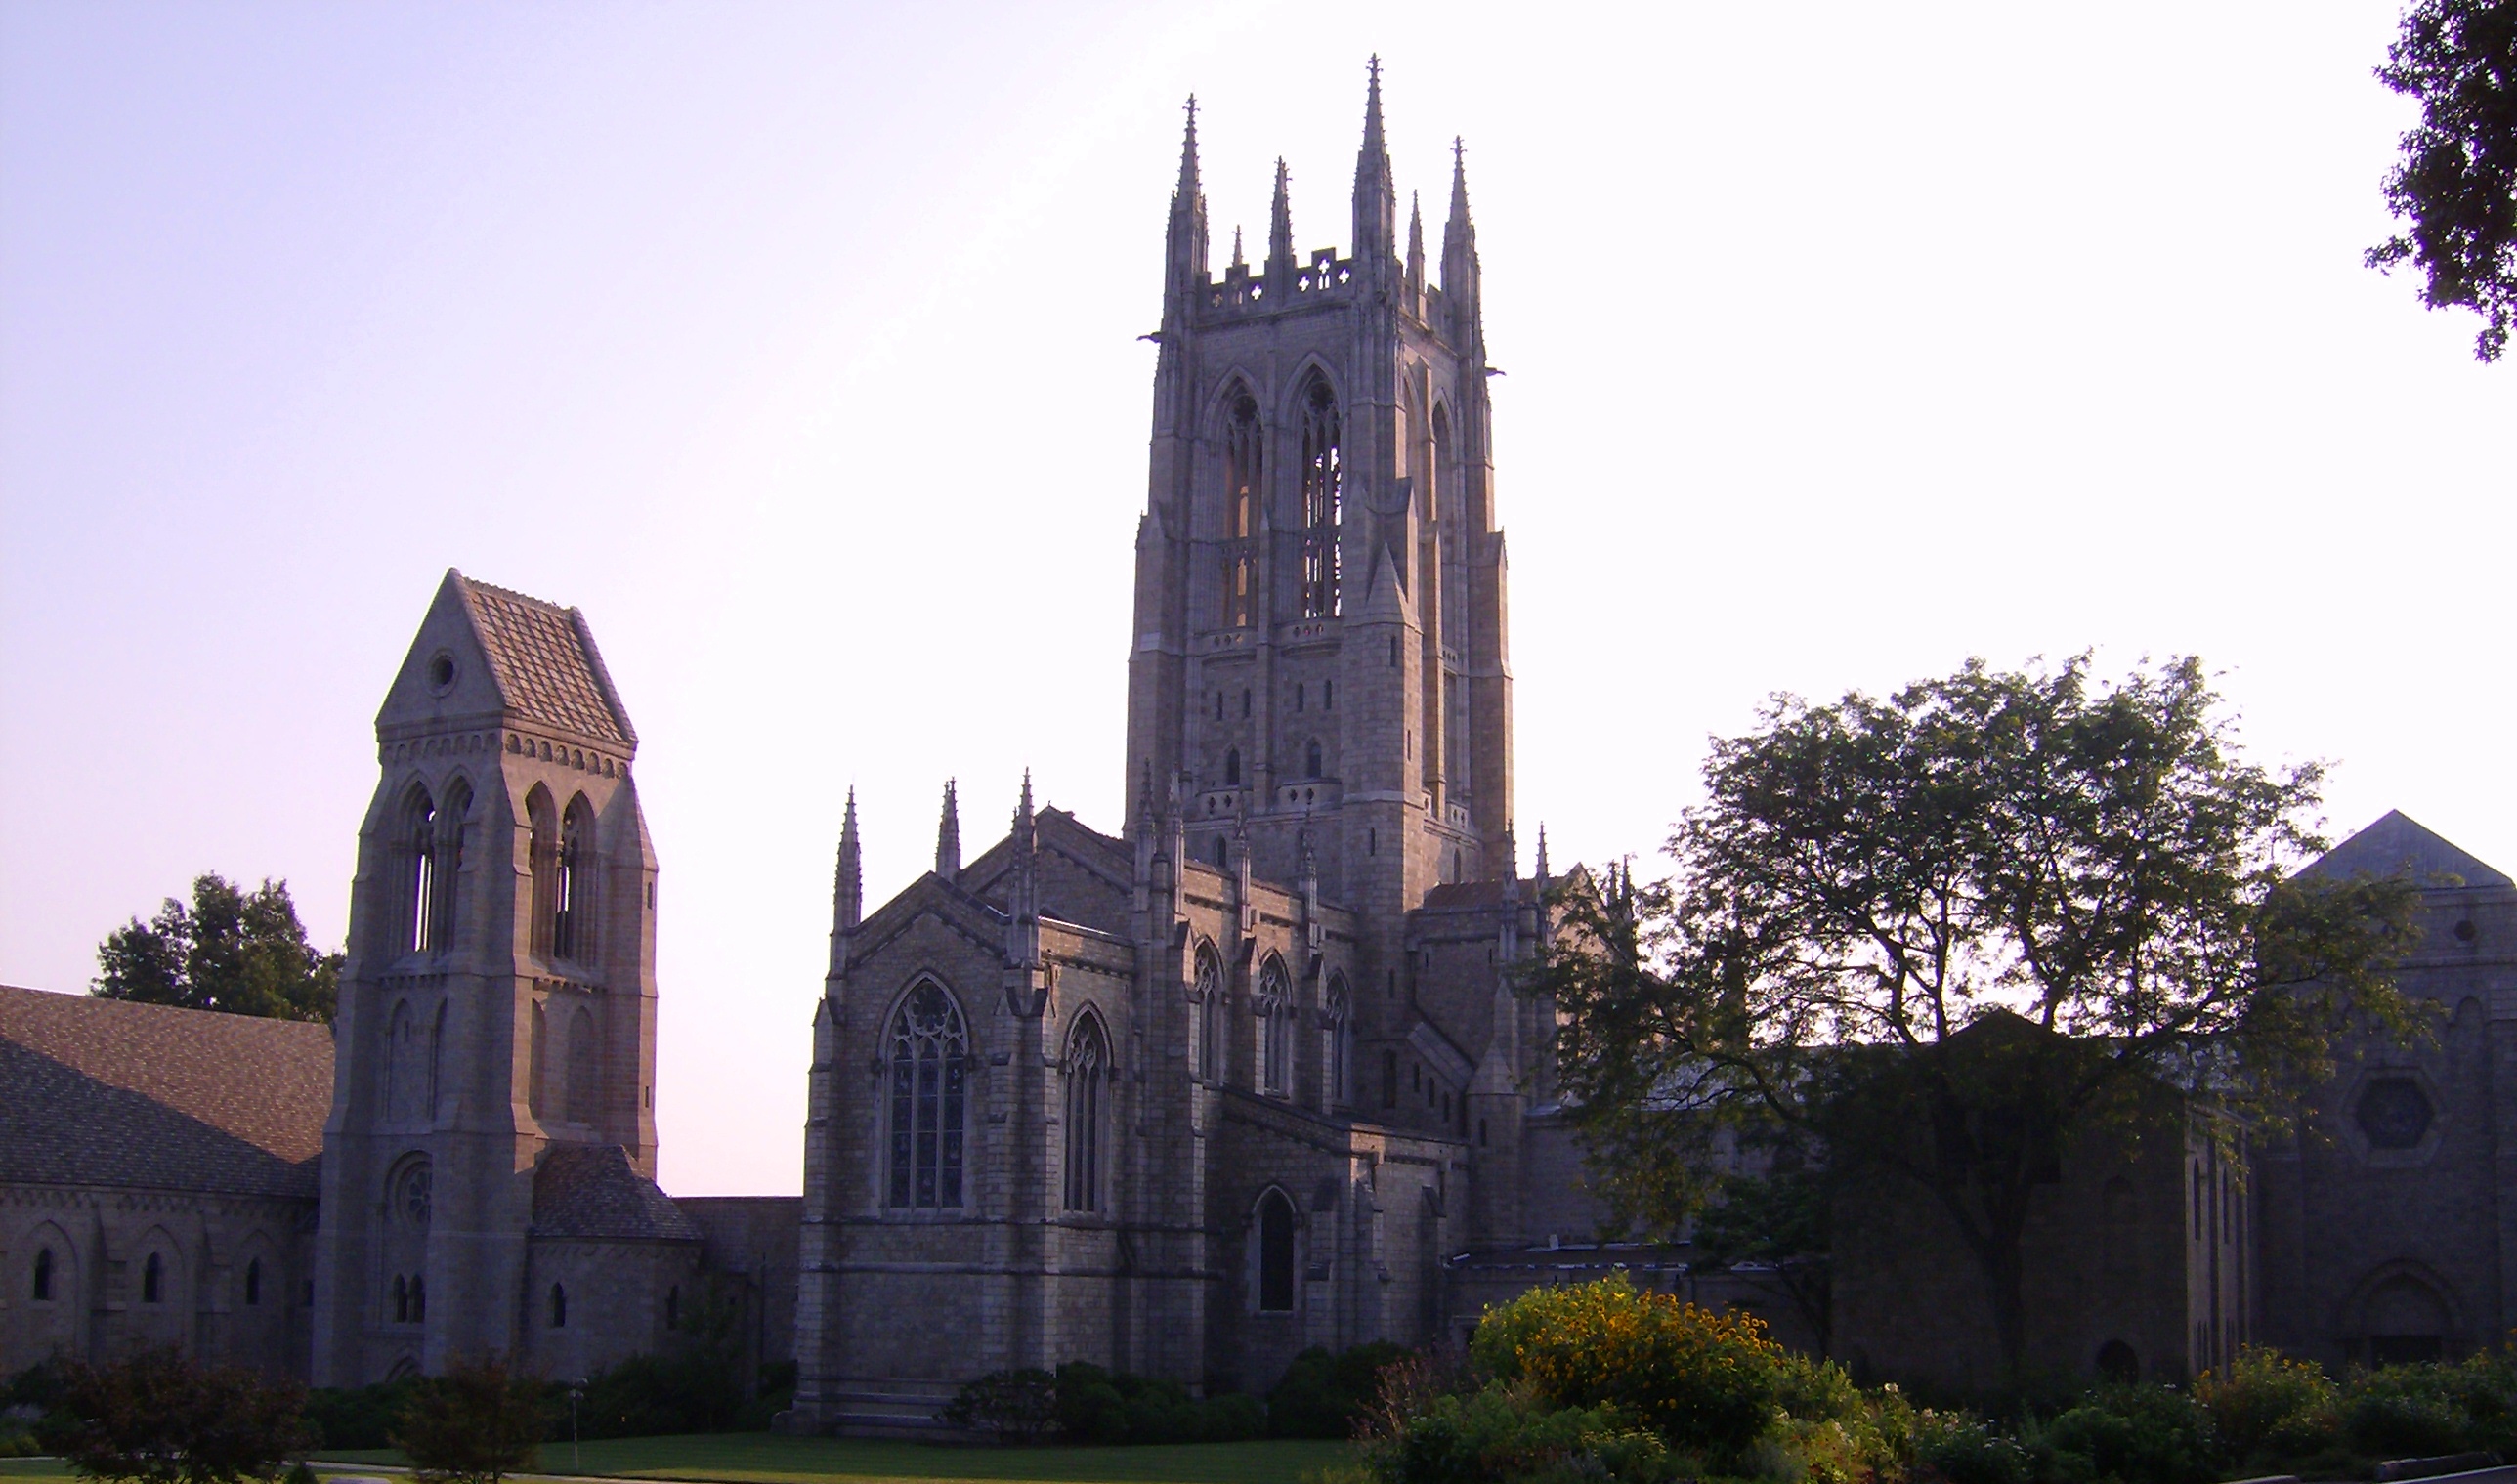 https://upload.wikimedia.org/wikipedia/commons/a/a9/Bryn_Athyn_Cathedral.jpg